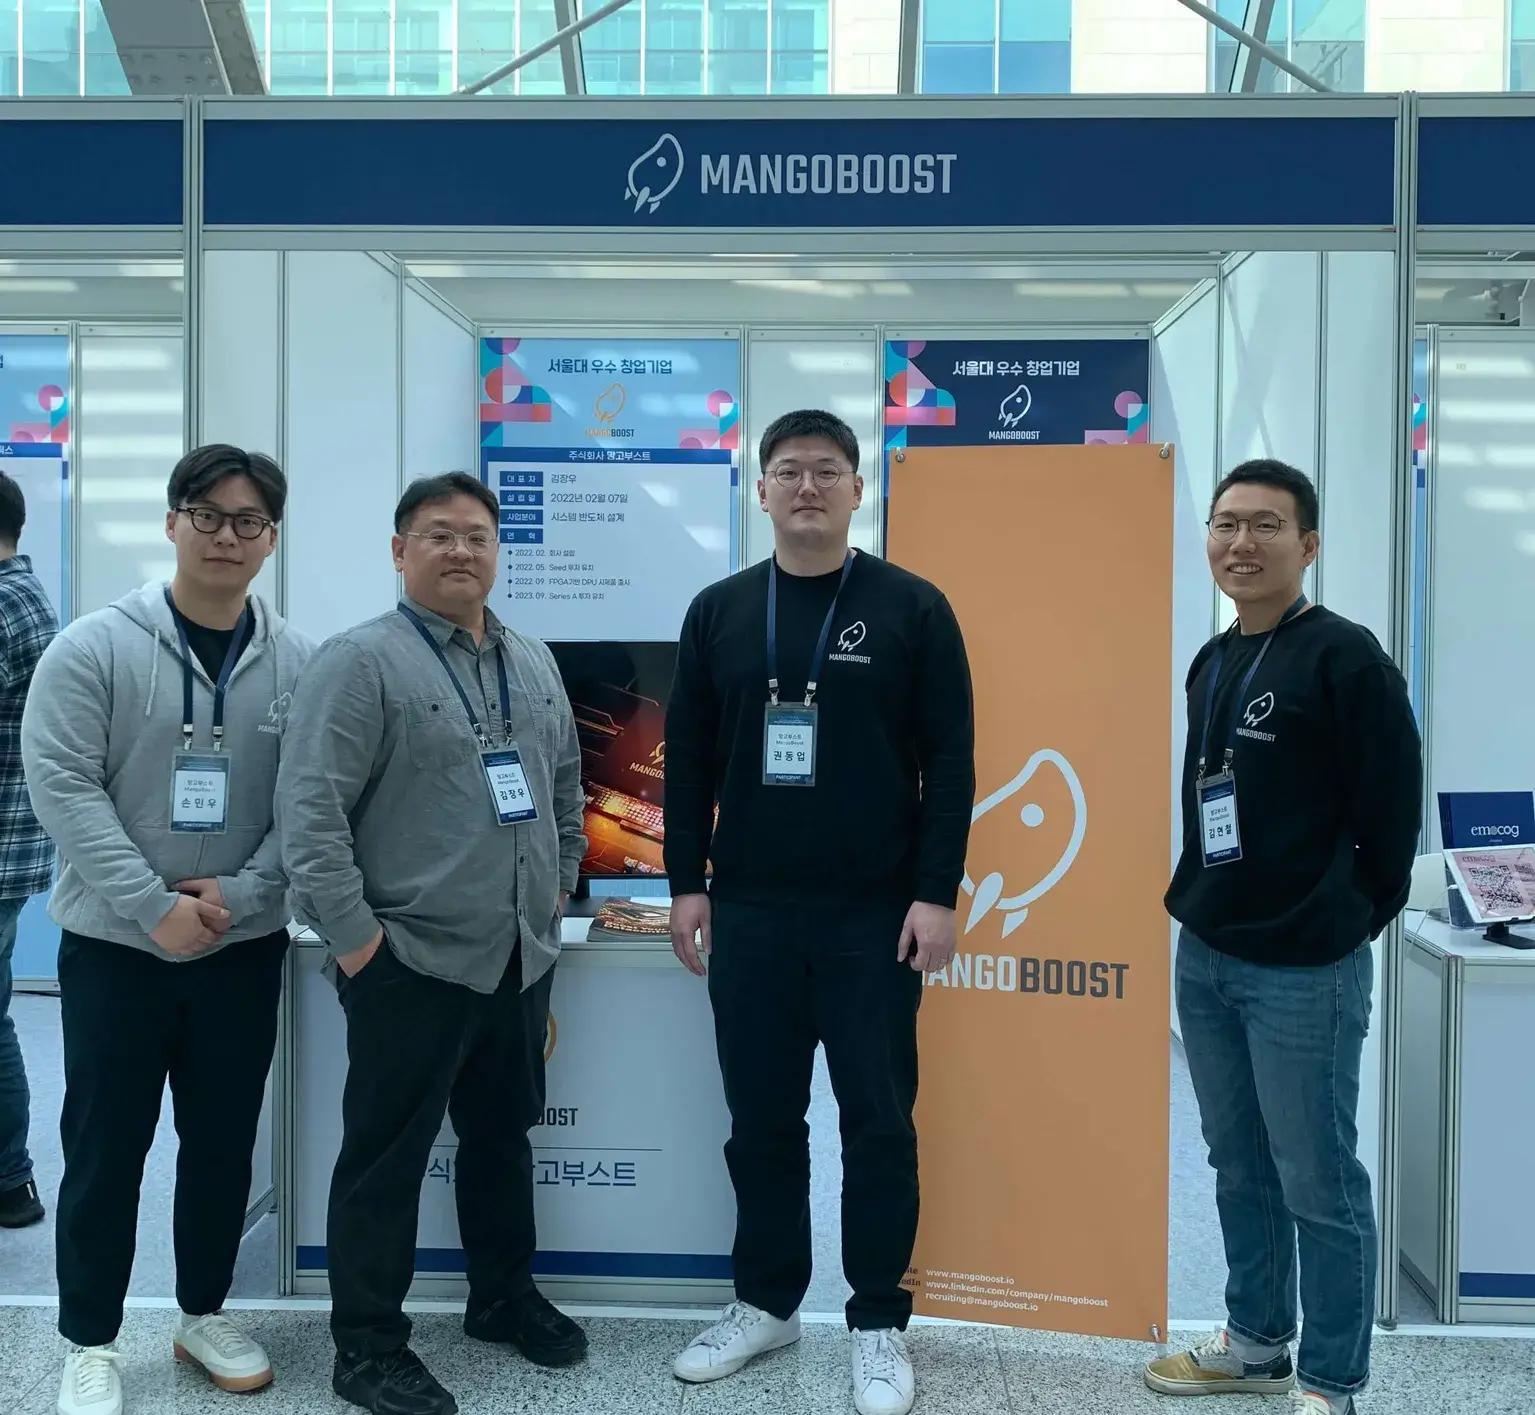 mangoboost team at event booth